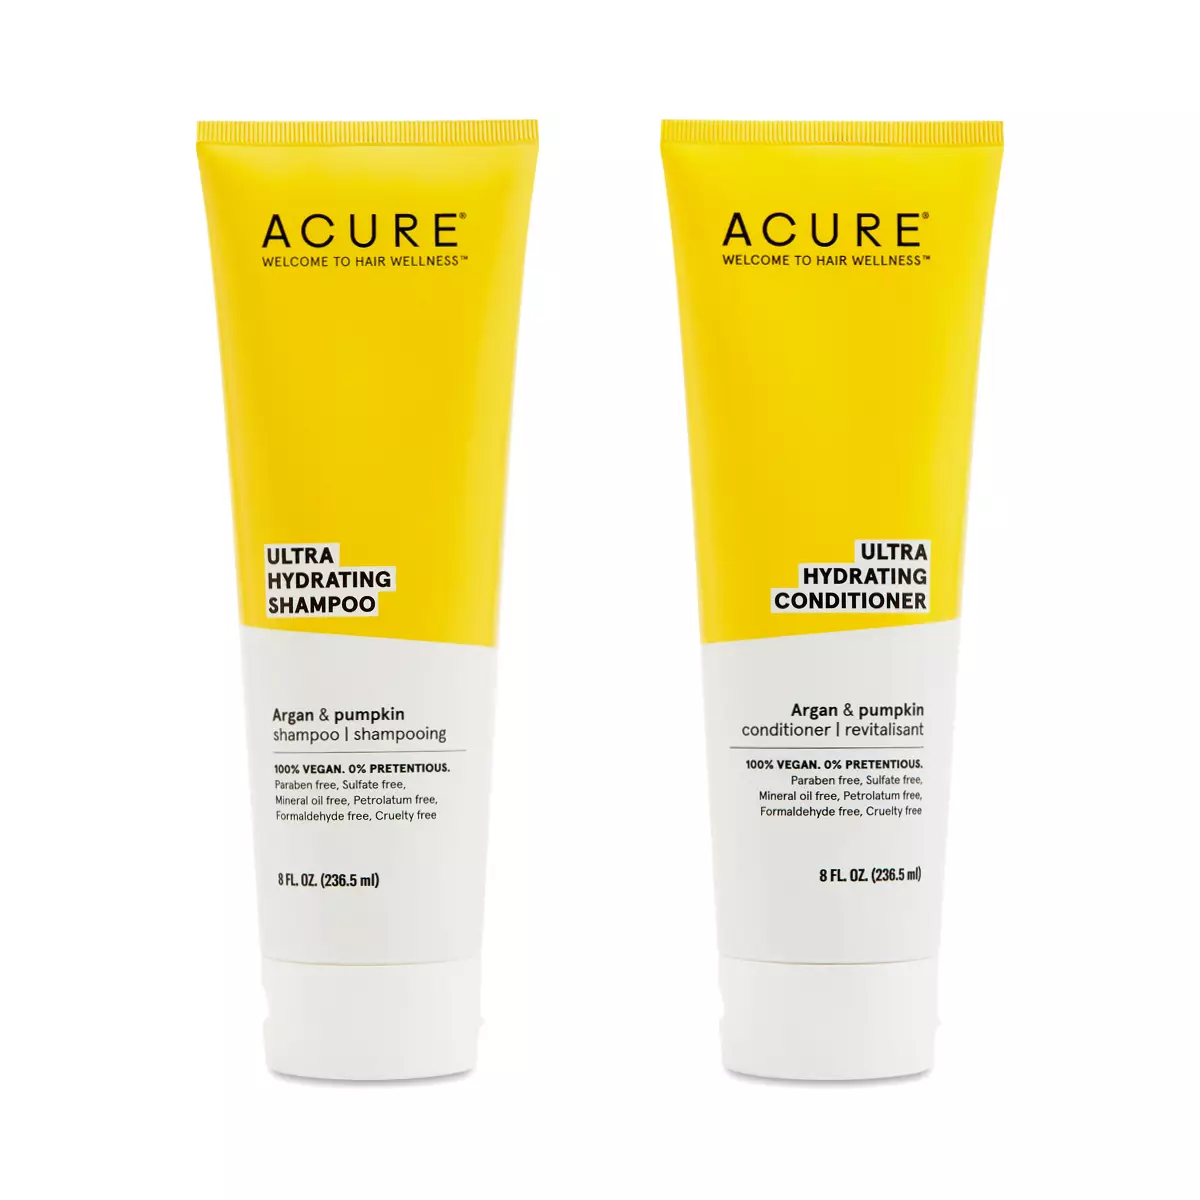 ACURE Ultra hydrating Shampoo -  Conditioner (236ml)